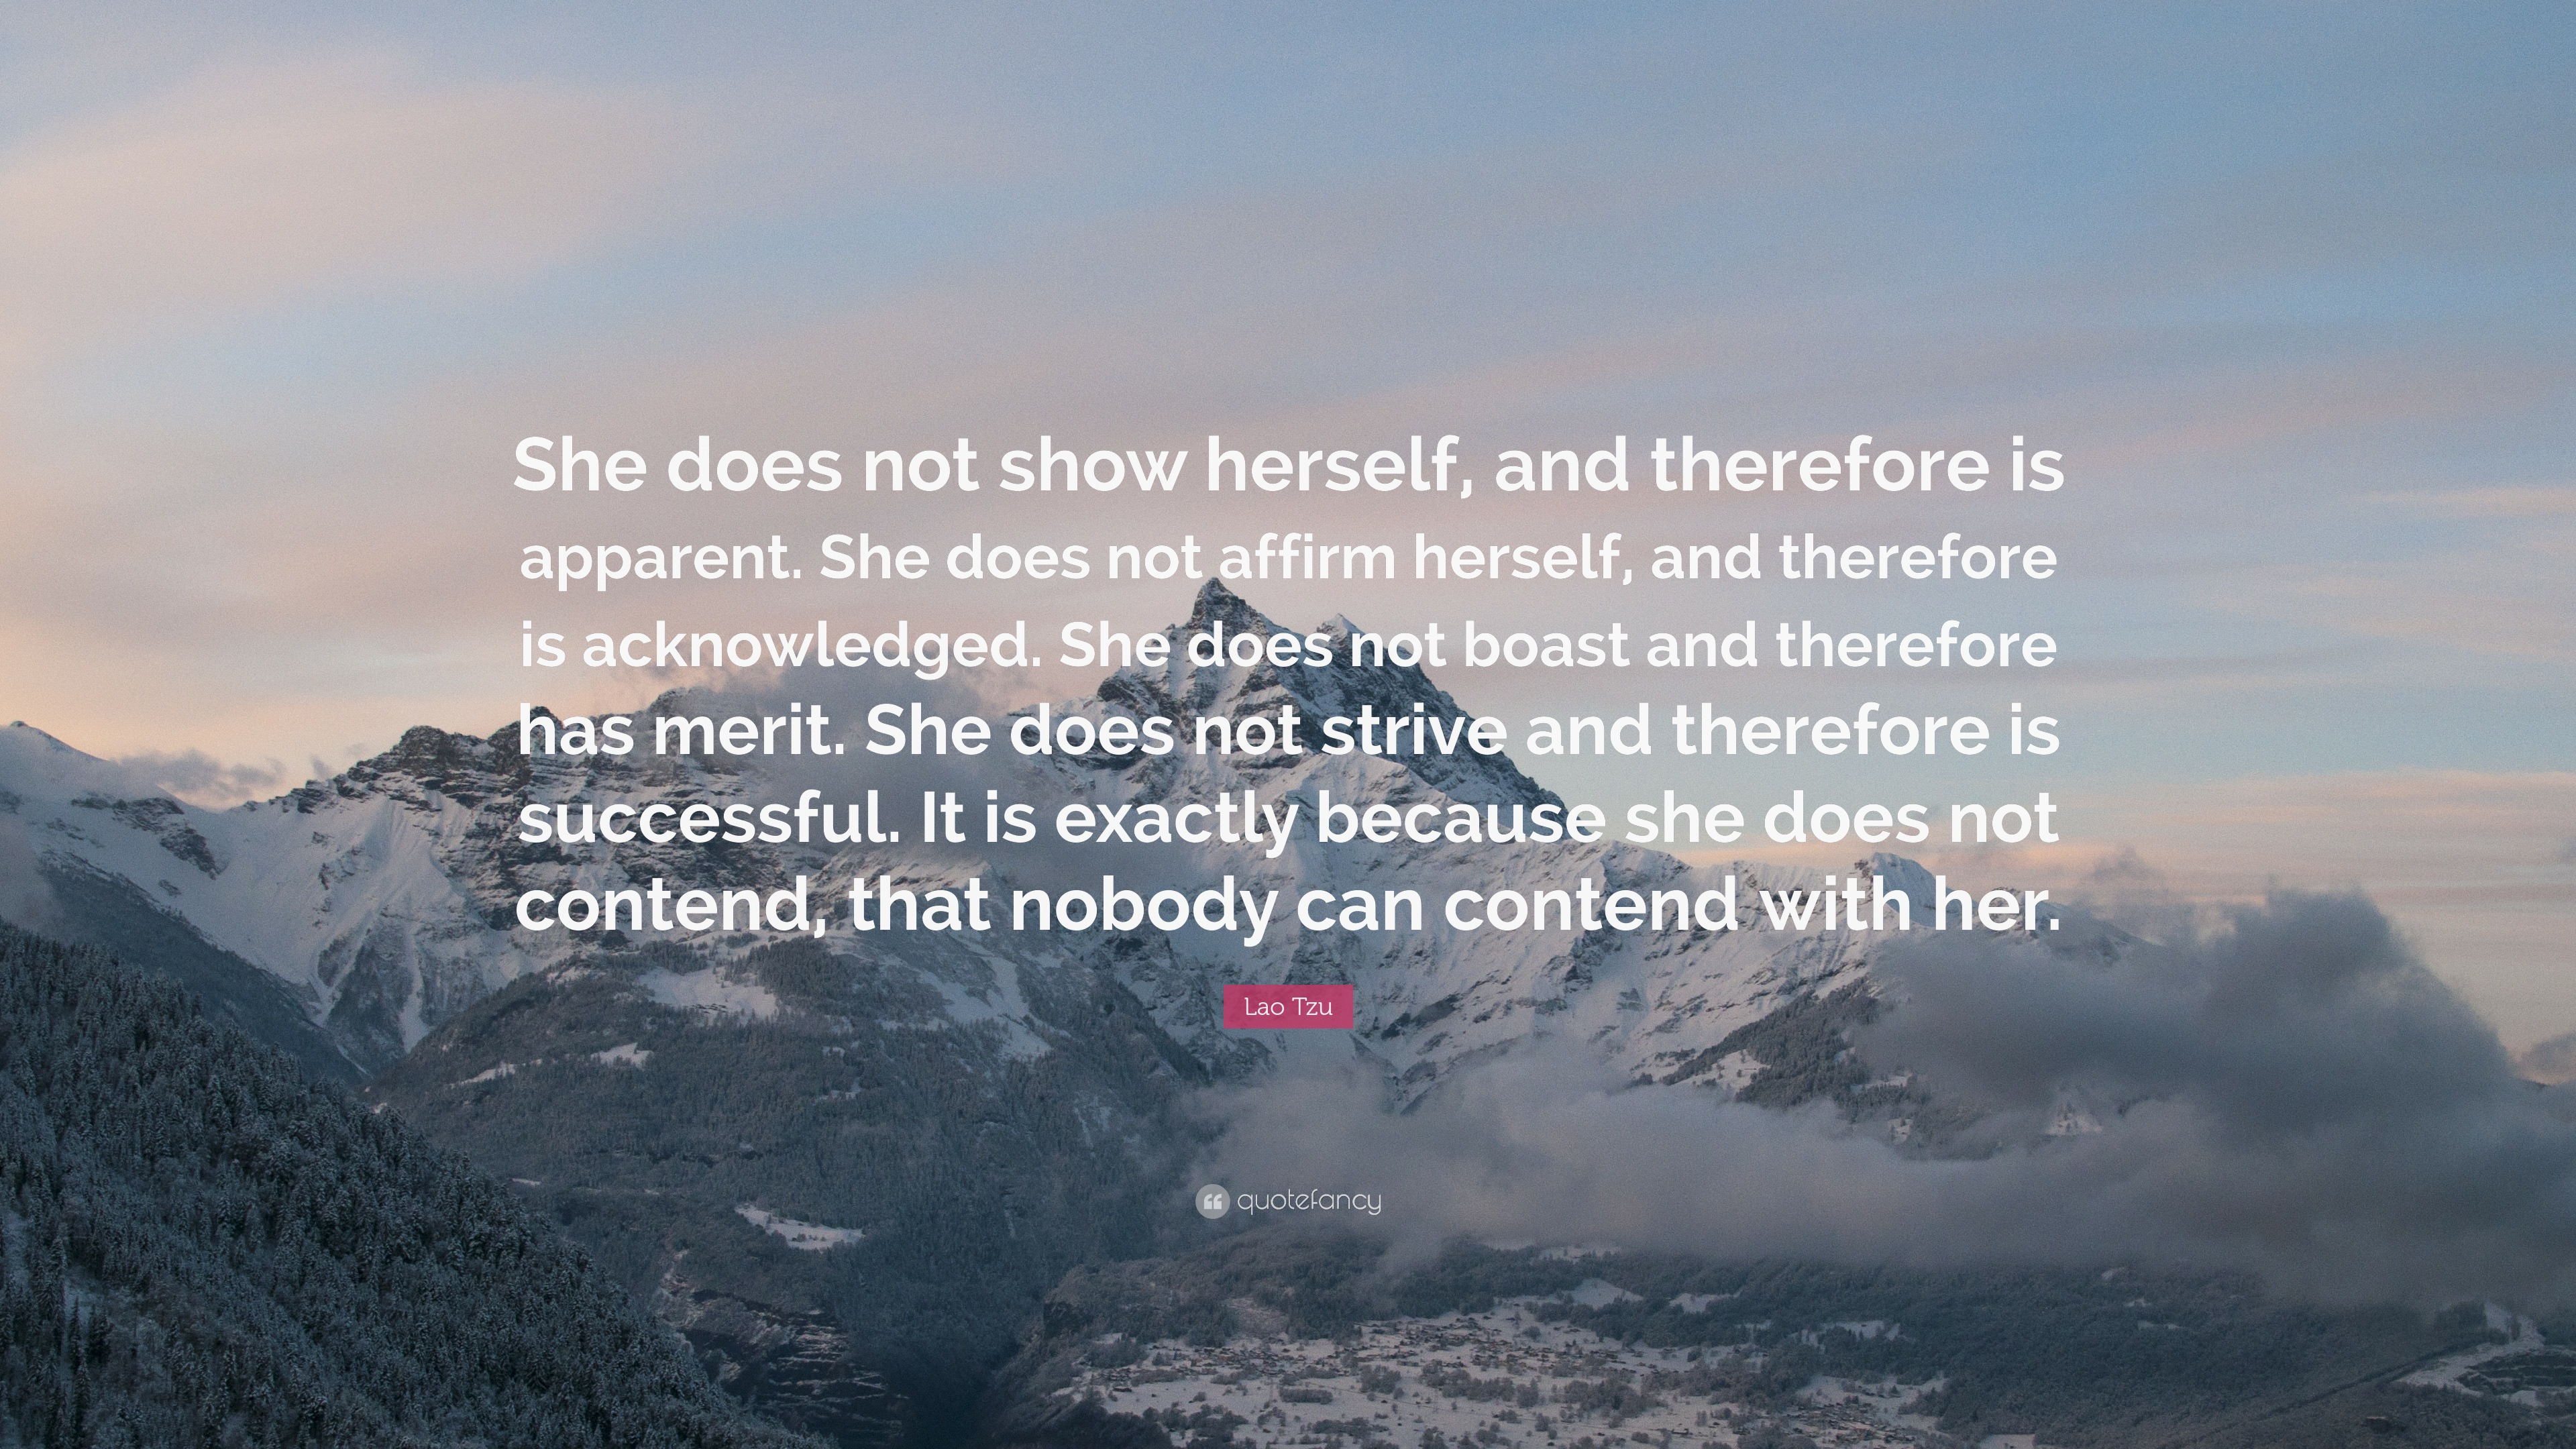 Lao Tzu Quote: “She does not show herself, and therefore is apparent ...